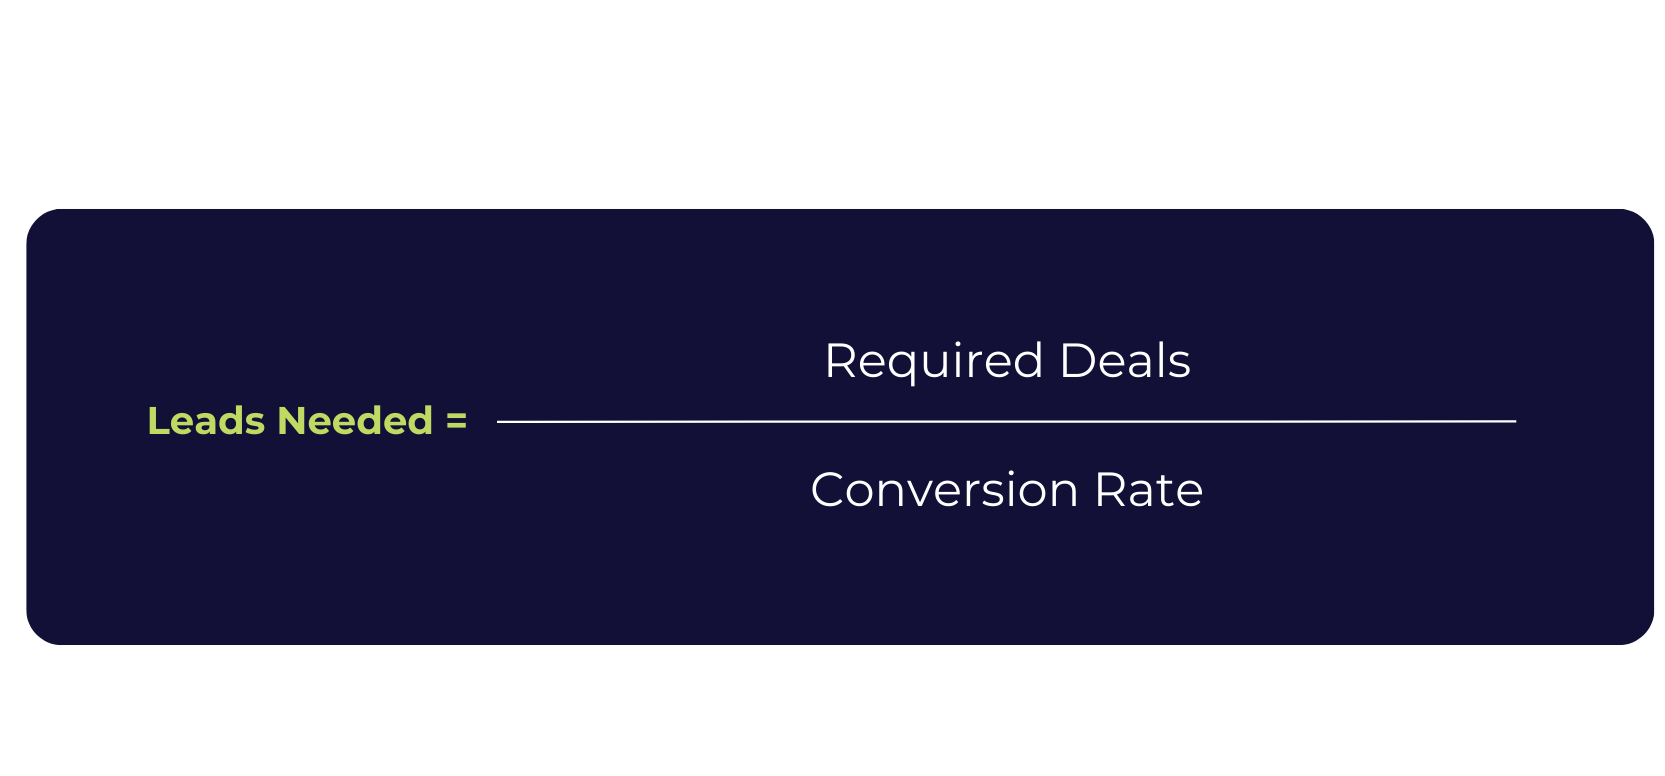 Leads Needed = Required Deals / Conversion Rate